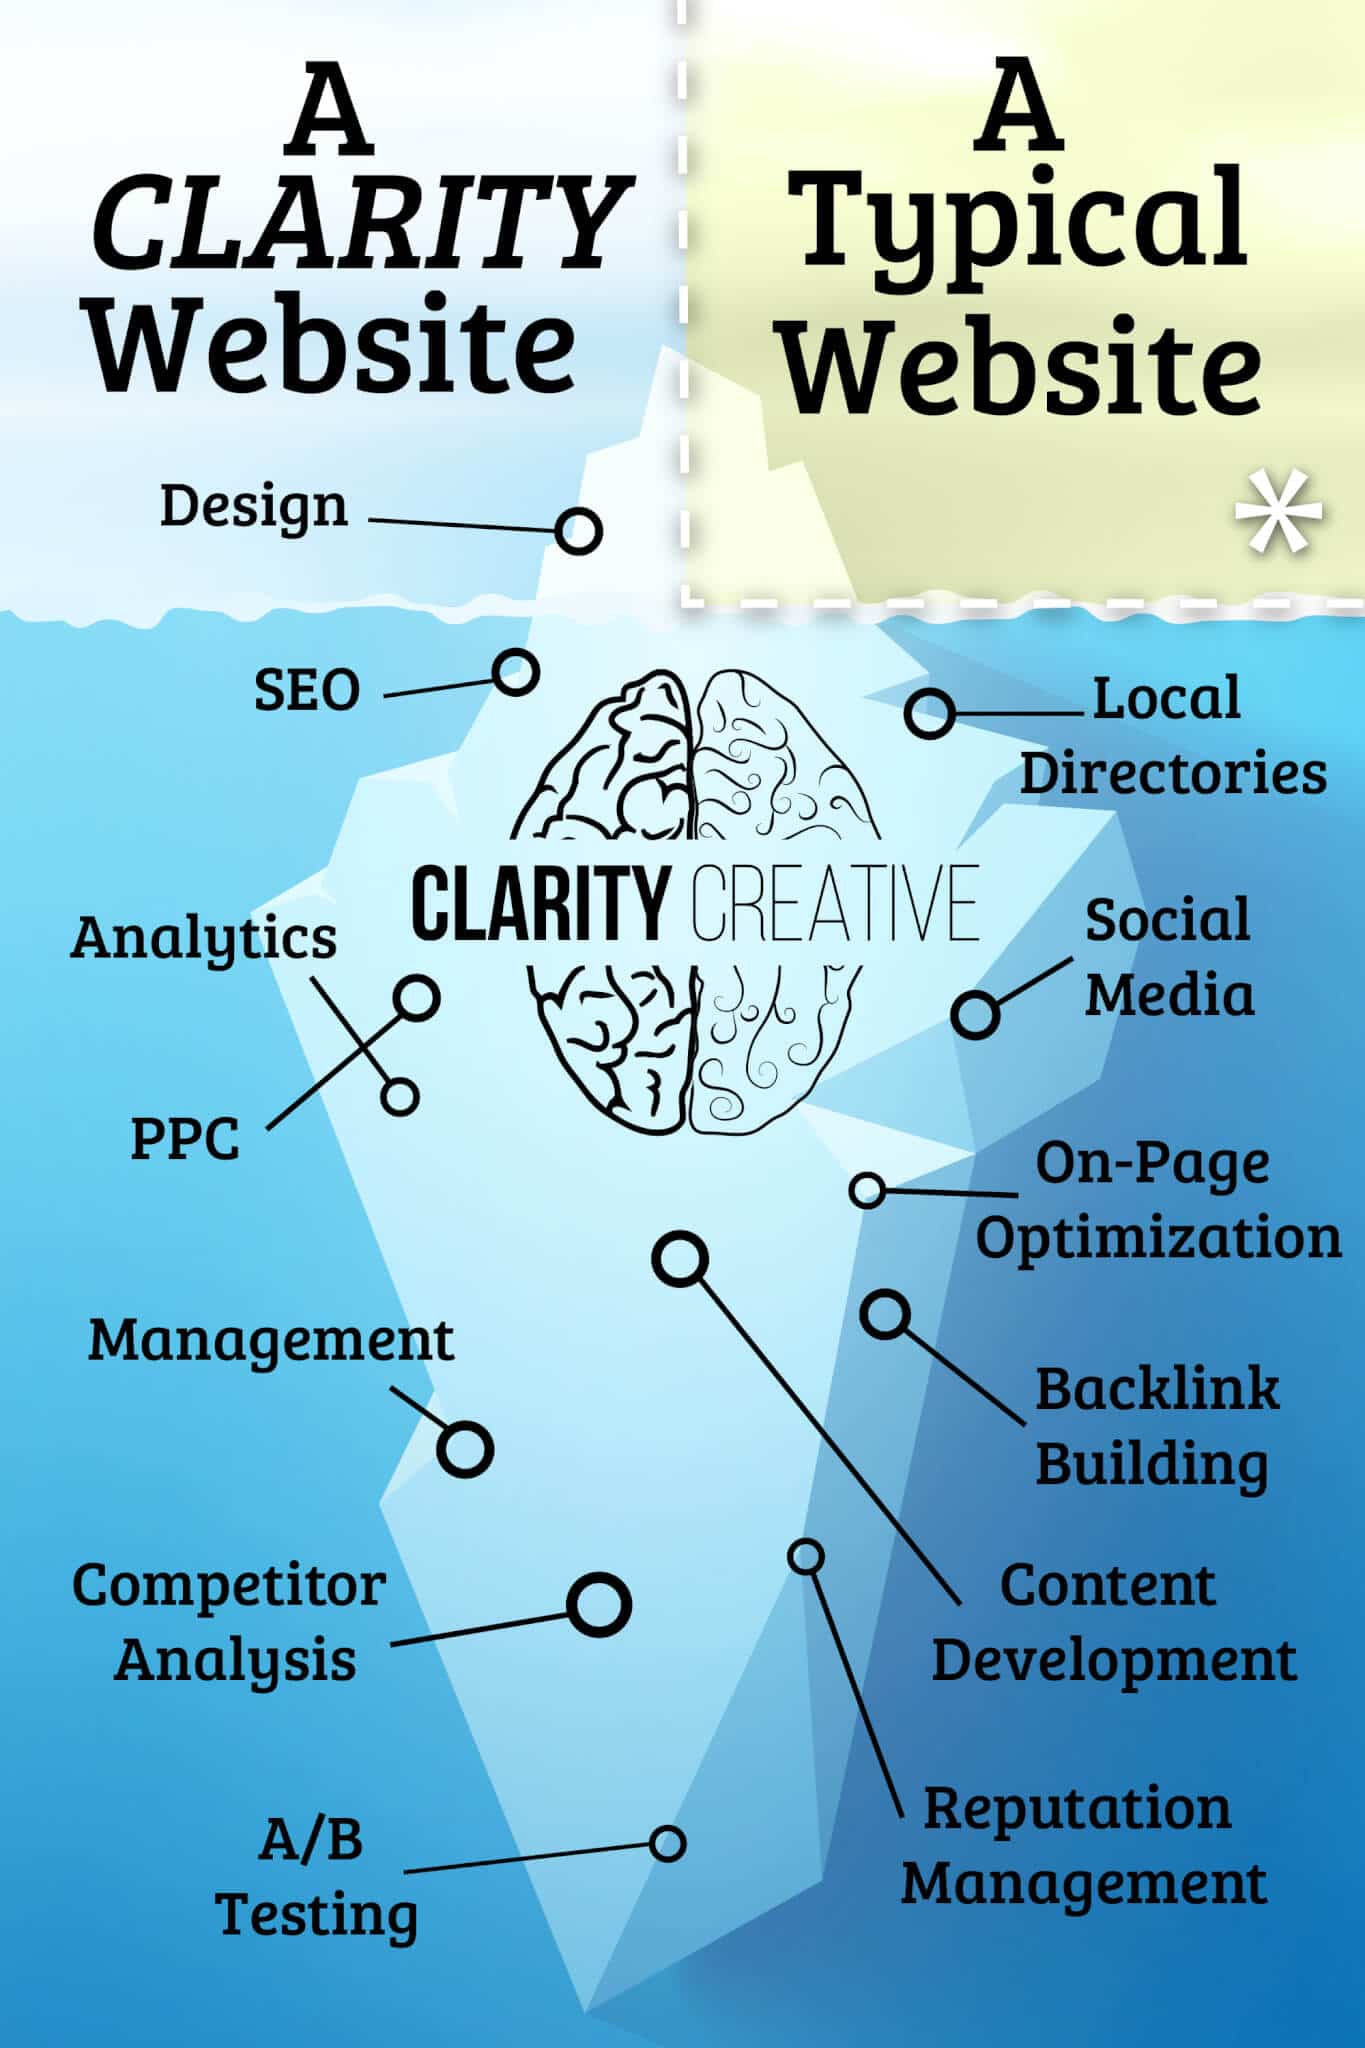 a clarity website vs. a typical website